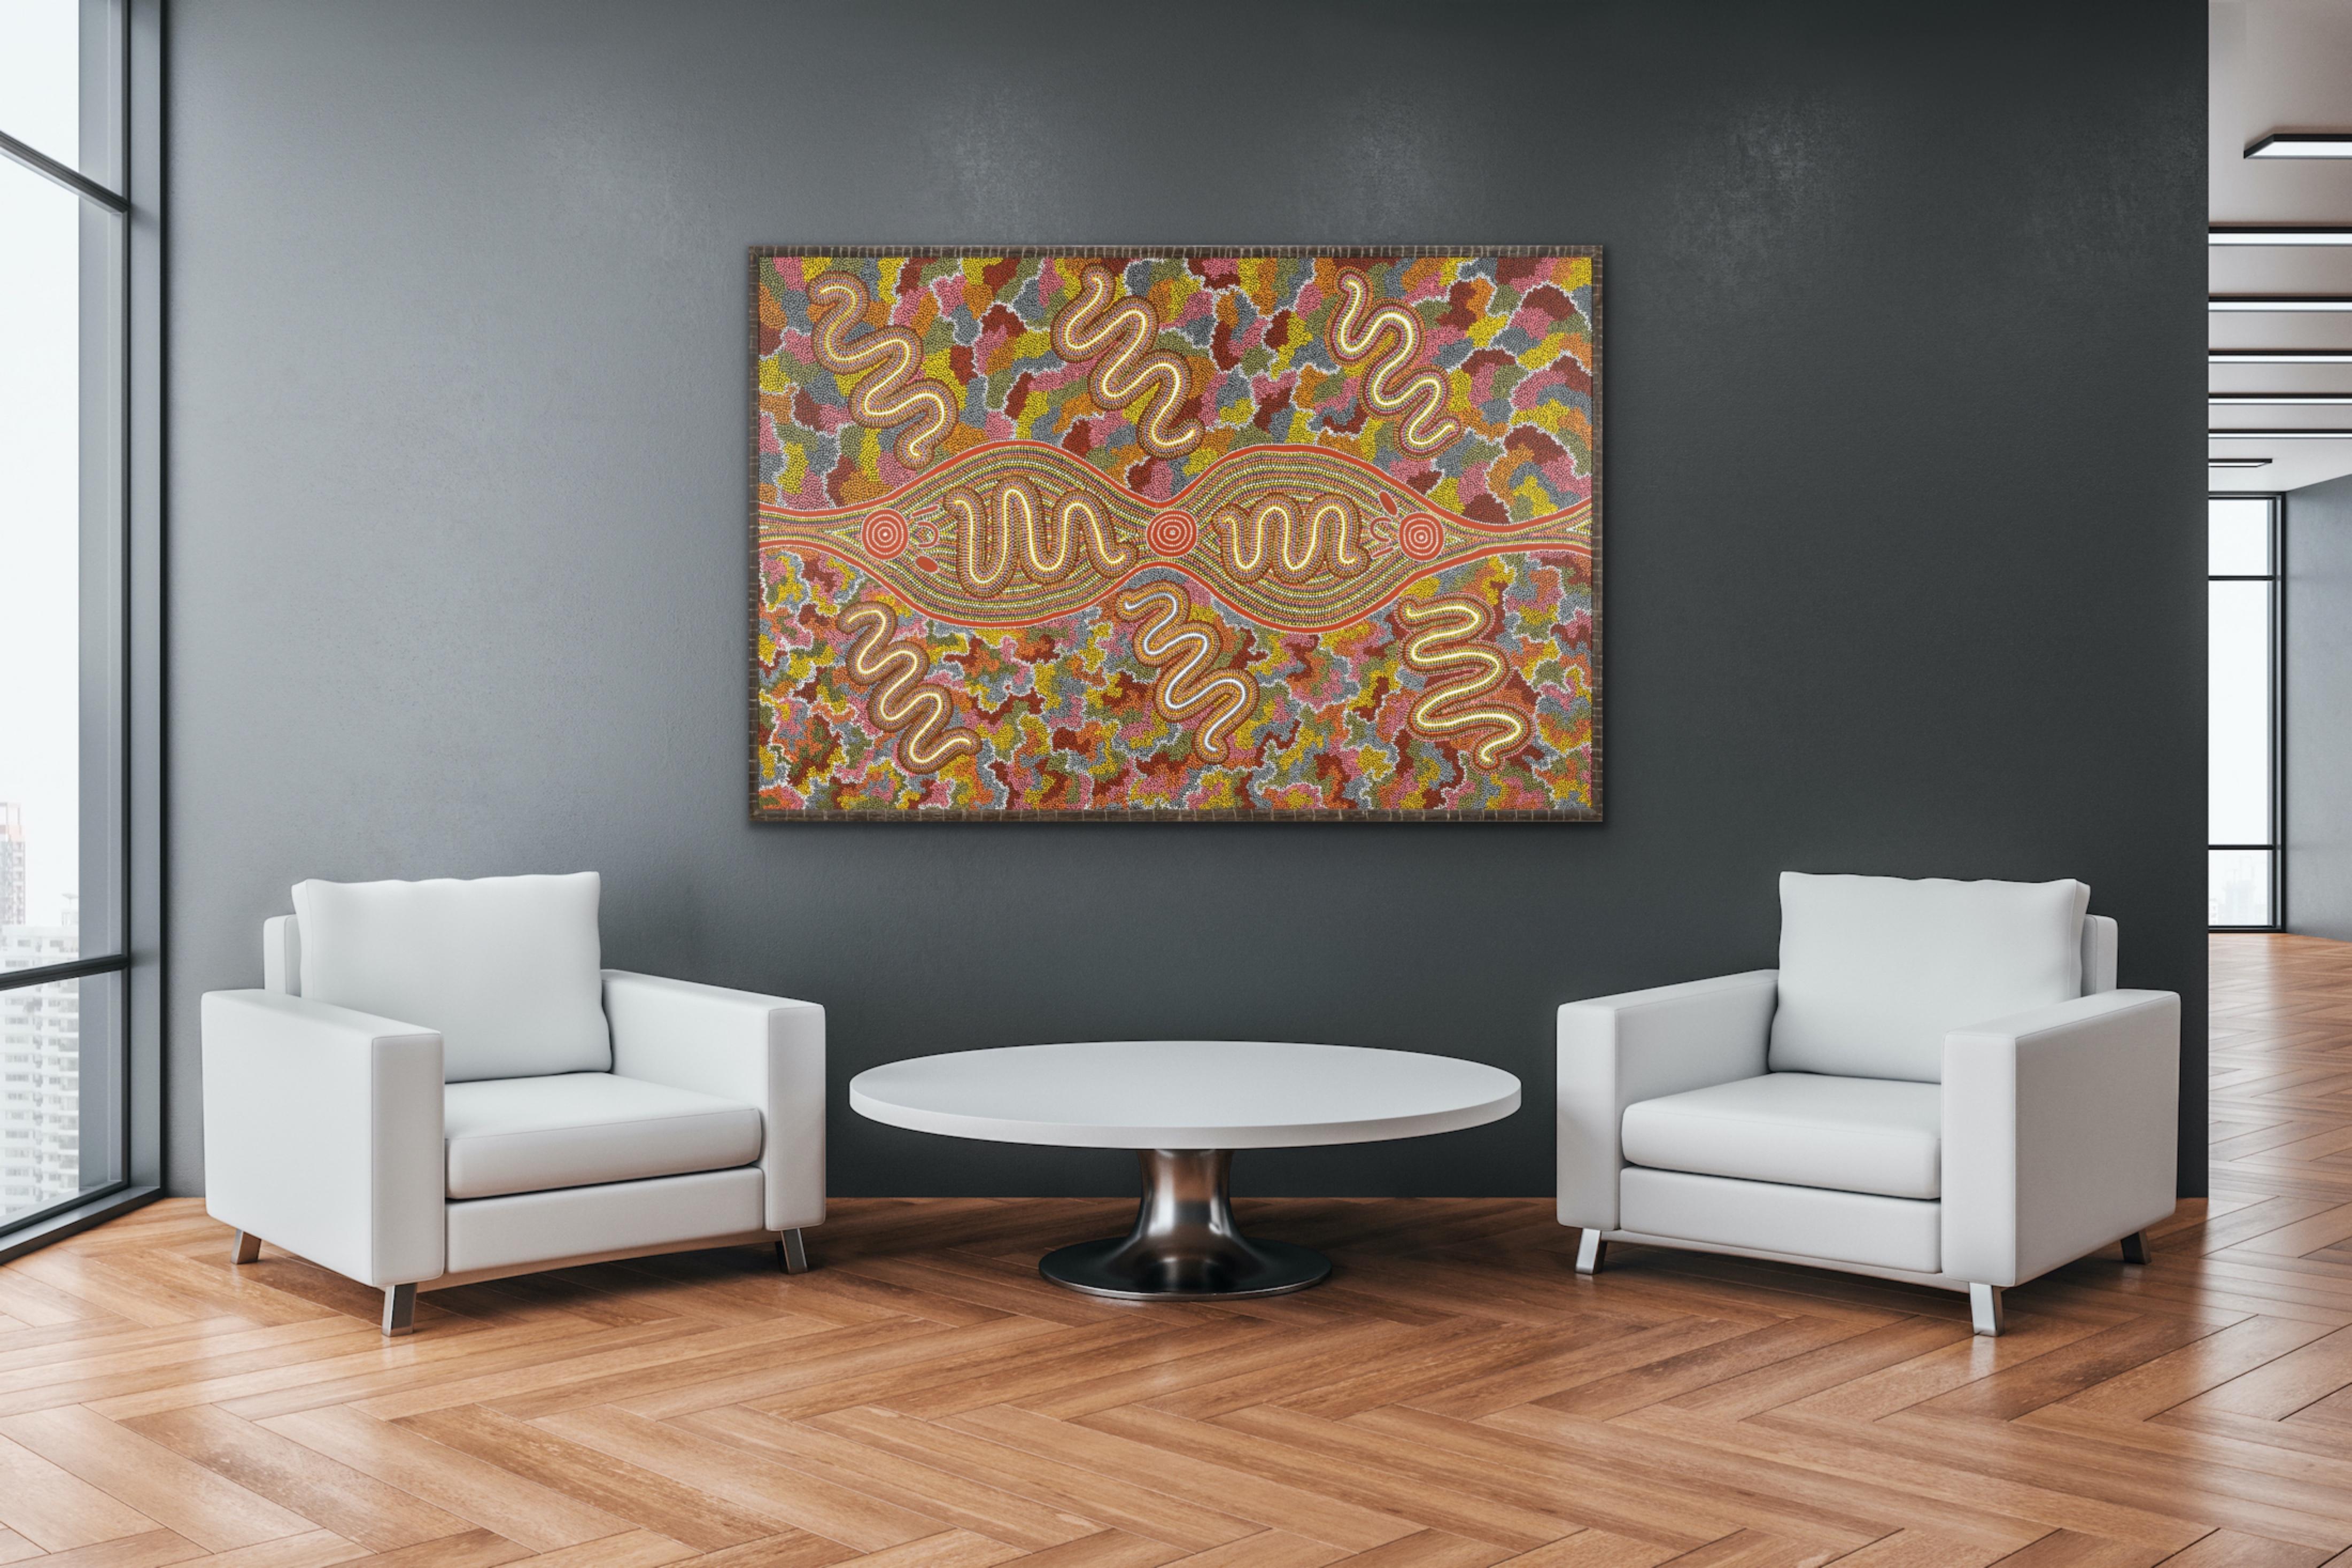 Worm Dreaming at Mt. Wedge - Aboriginal Australian Abstract Pointillist COLORFUL 4